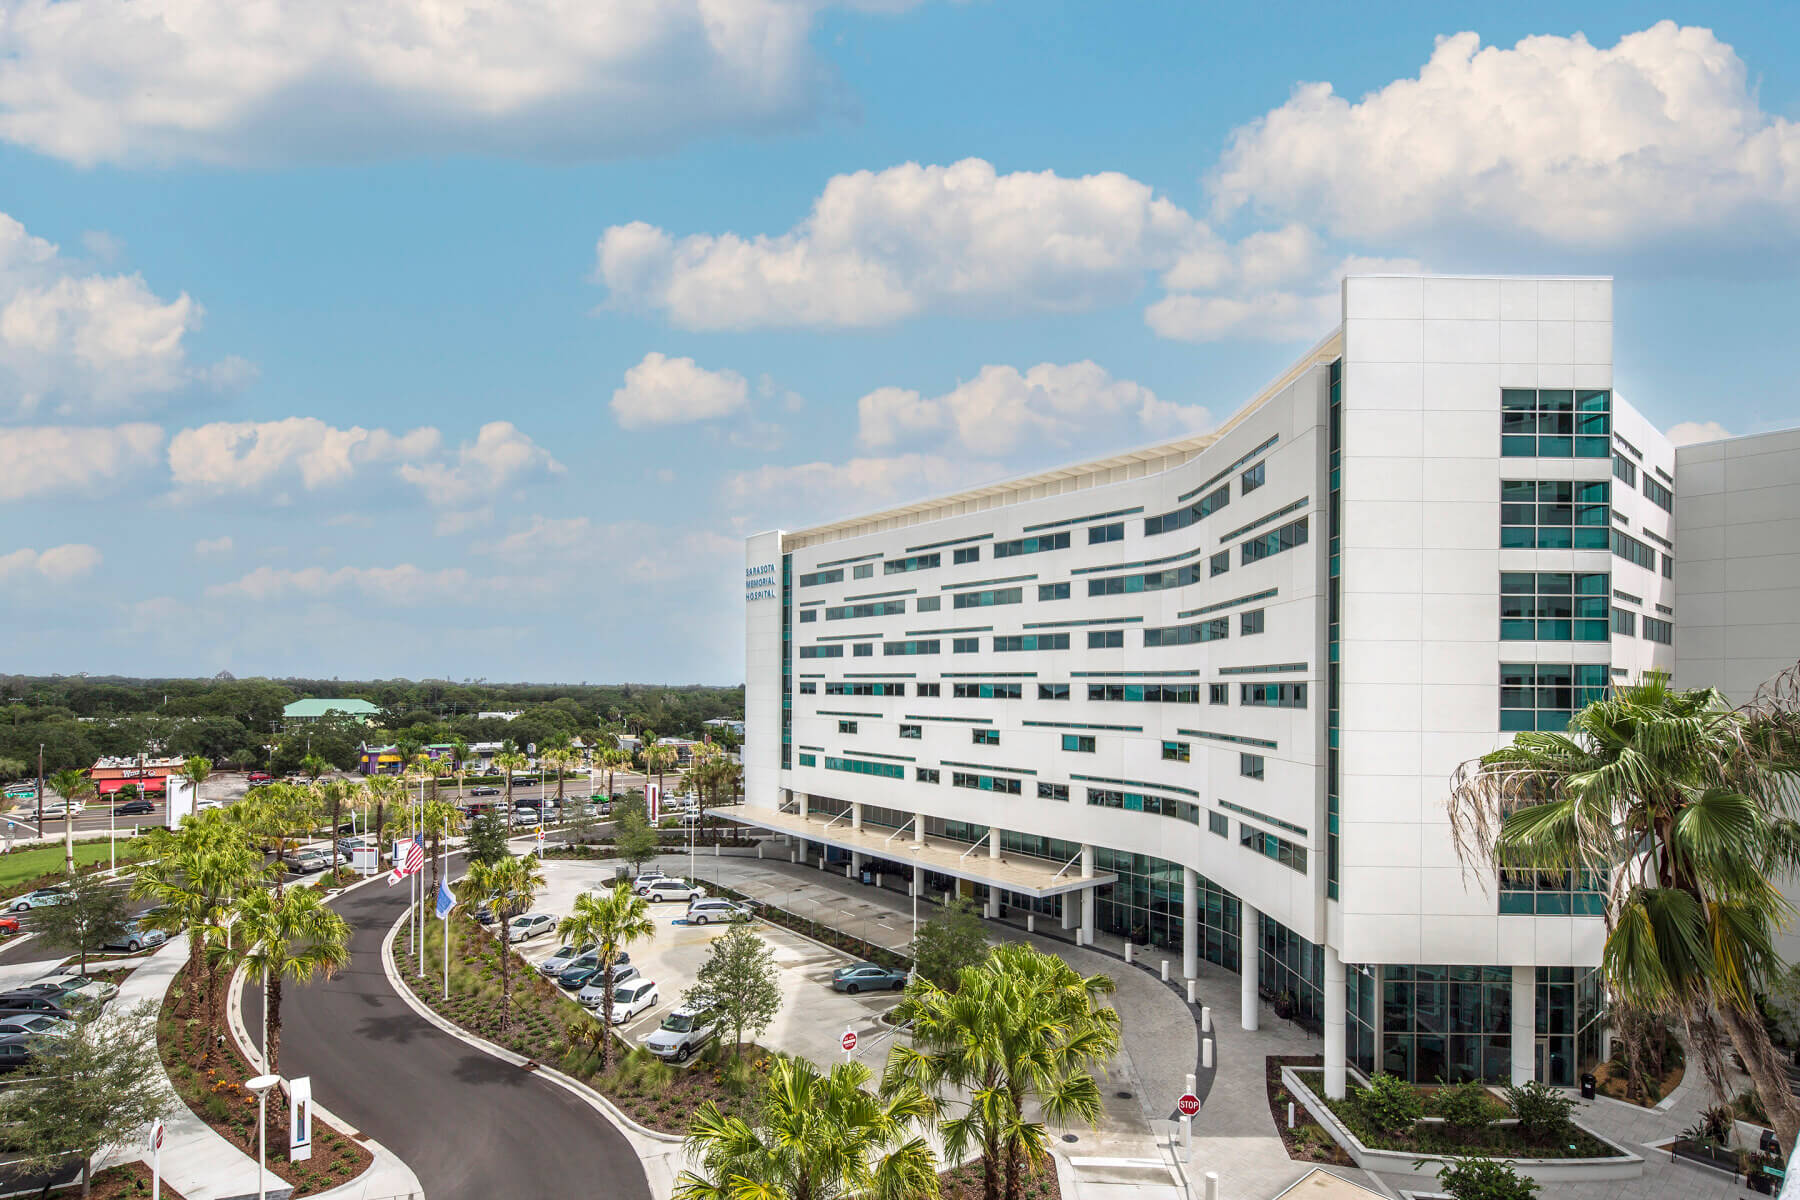 The exterior of the nine-story patient tower at Sarasota Memorial Hospital